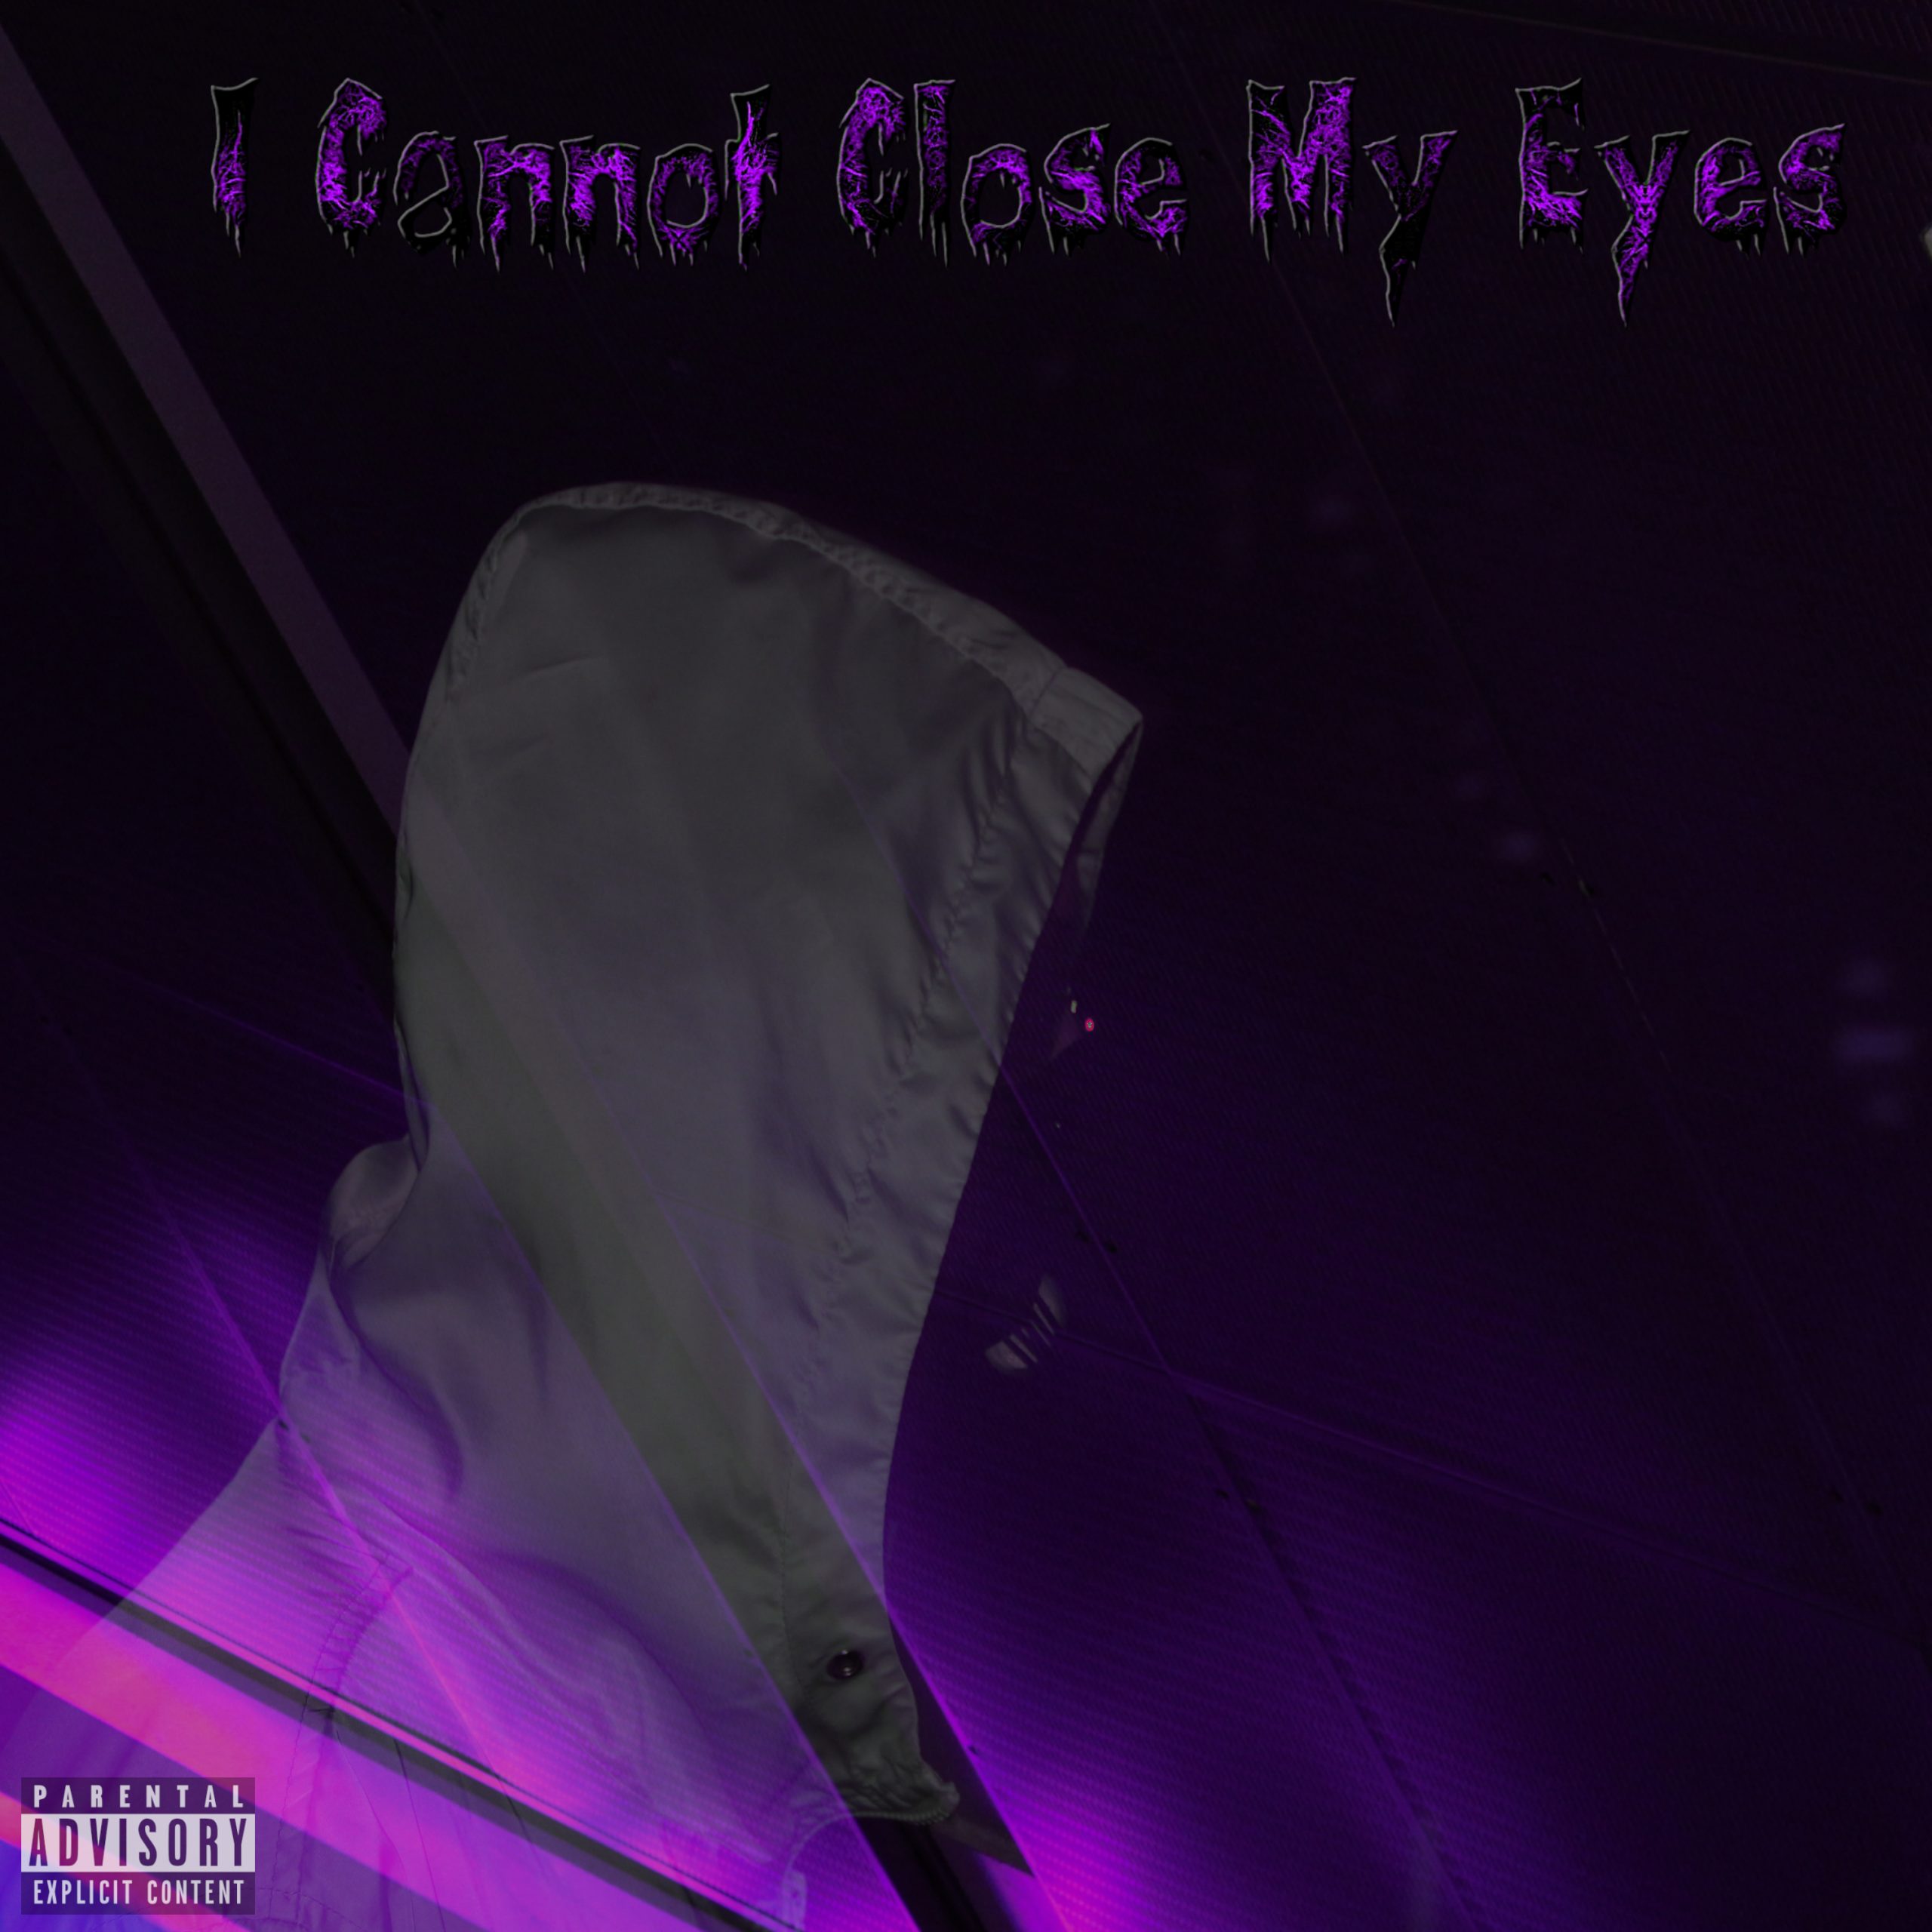 Close My Eyes is the new single off of Hip Hop artist, Purpz’ latest album which deals with the pain that comes from heartbreak